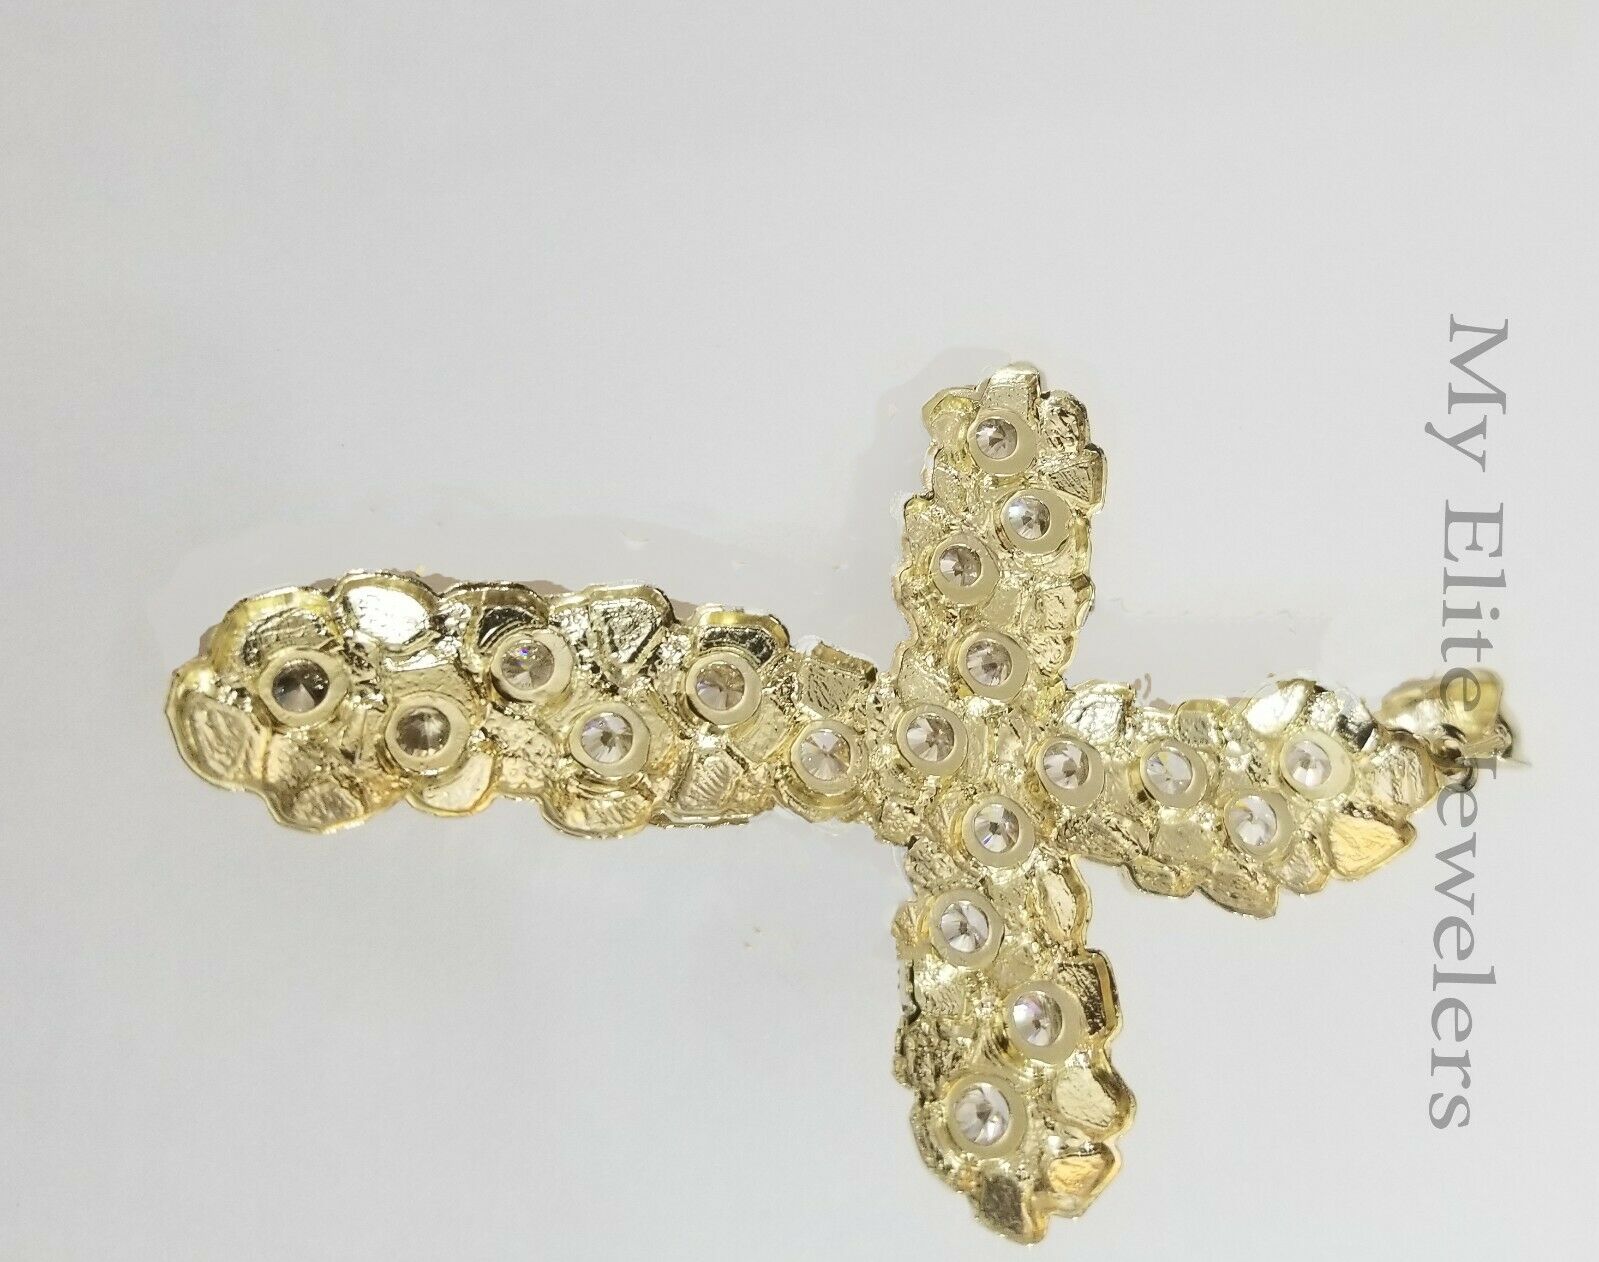 14k Yellow Gold Cross Nugget Jesus Crucifix Pendant 3.5 Inch 14kt Gold Mens REAL